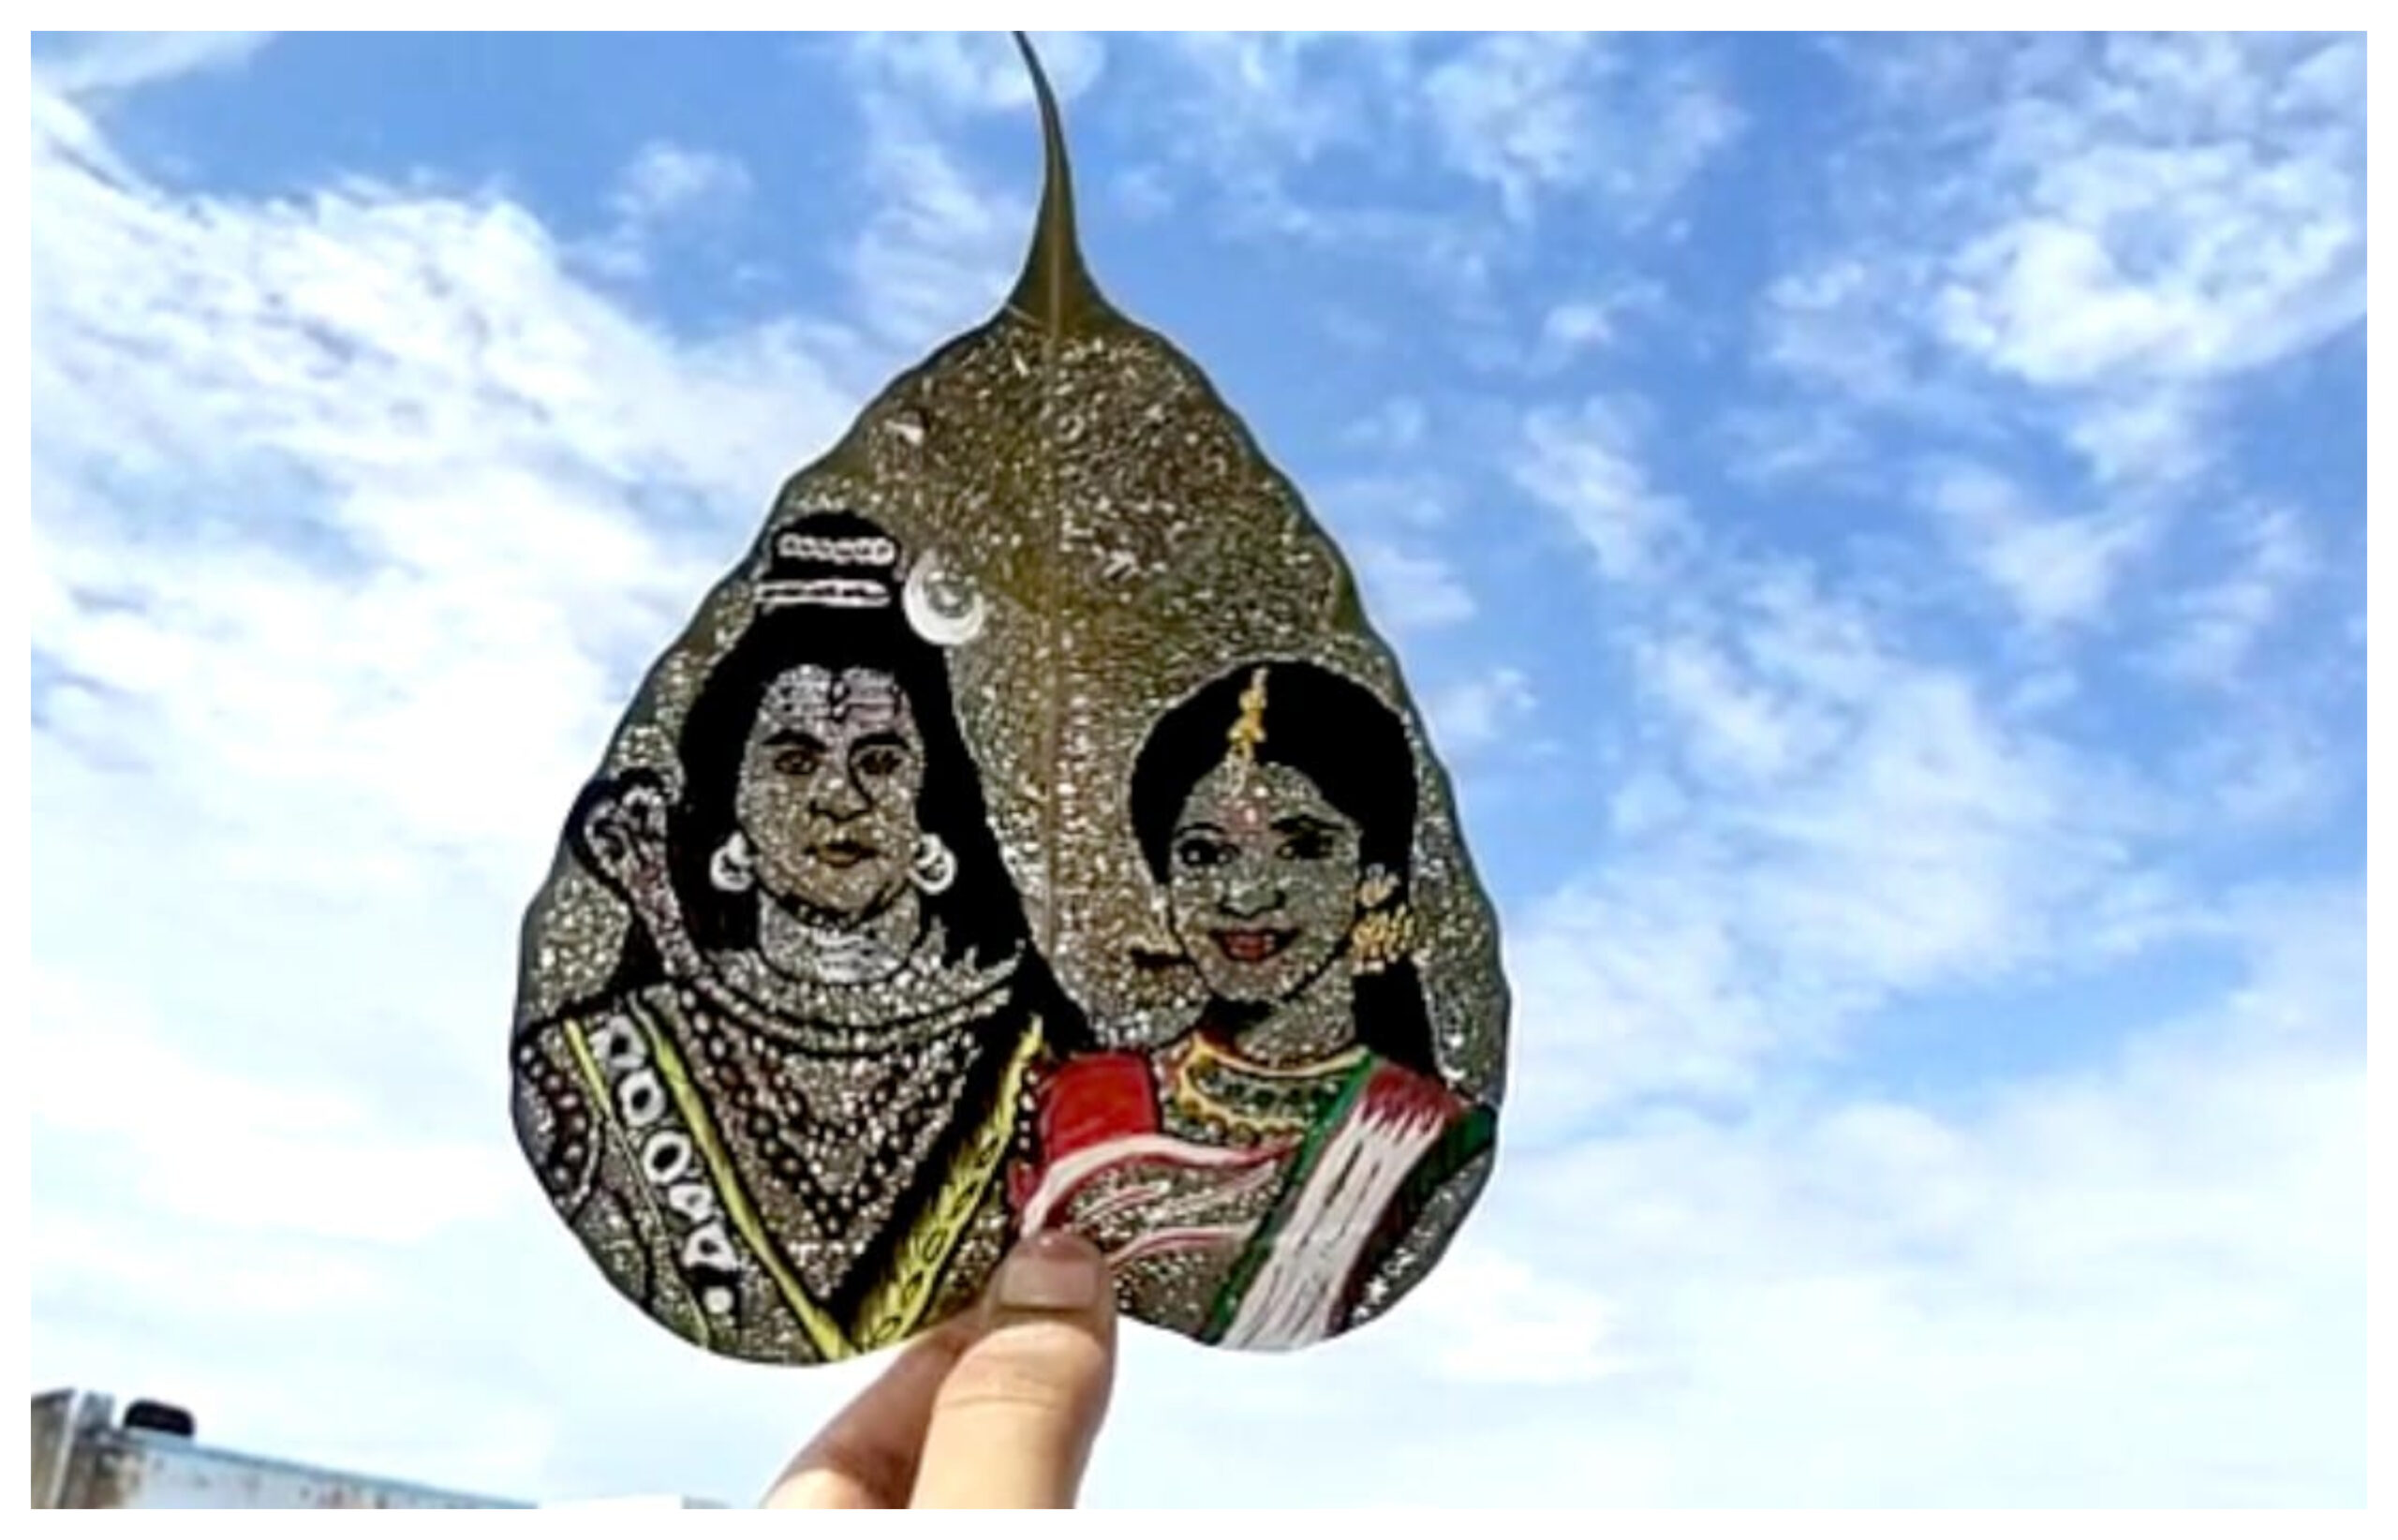 shree-ram-amazing-talent-made-pictures-of-gods-and-goddesses-on-dry-peepal-leaves-youtube-twitter-facebook-google-amazon-bikaner-news-rajasthan-news-art-and-culture-panting-rajasthan-talente